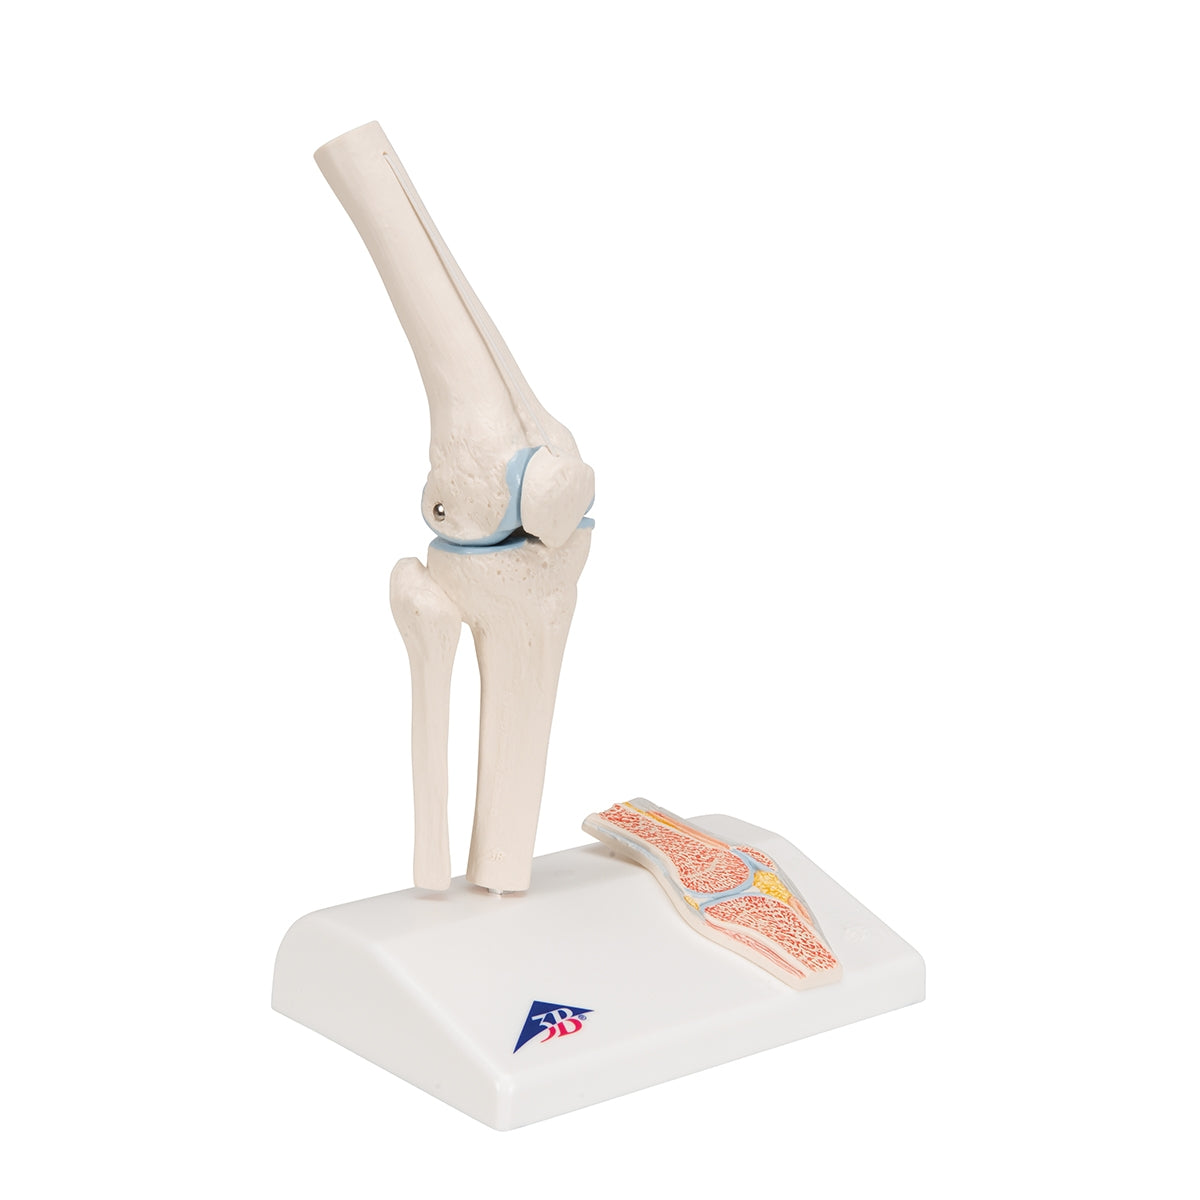 Mini Human Knee Joint Model with Cross Section